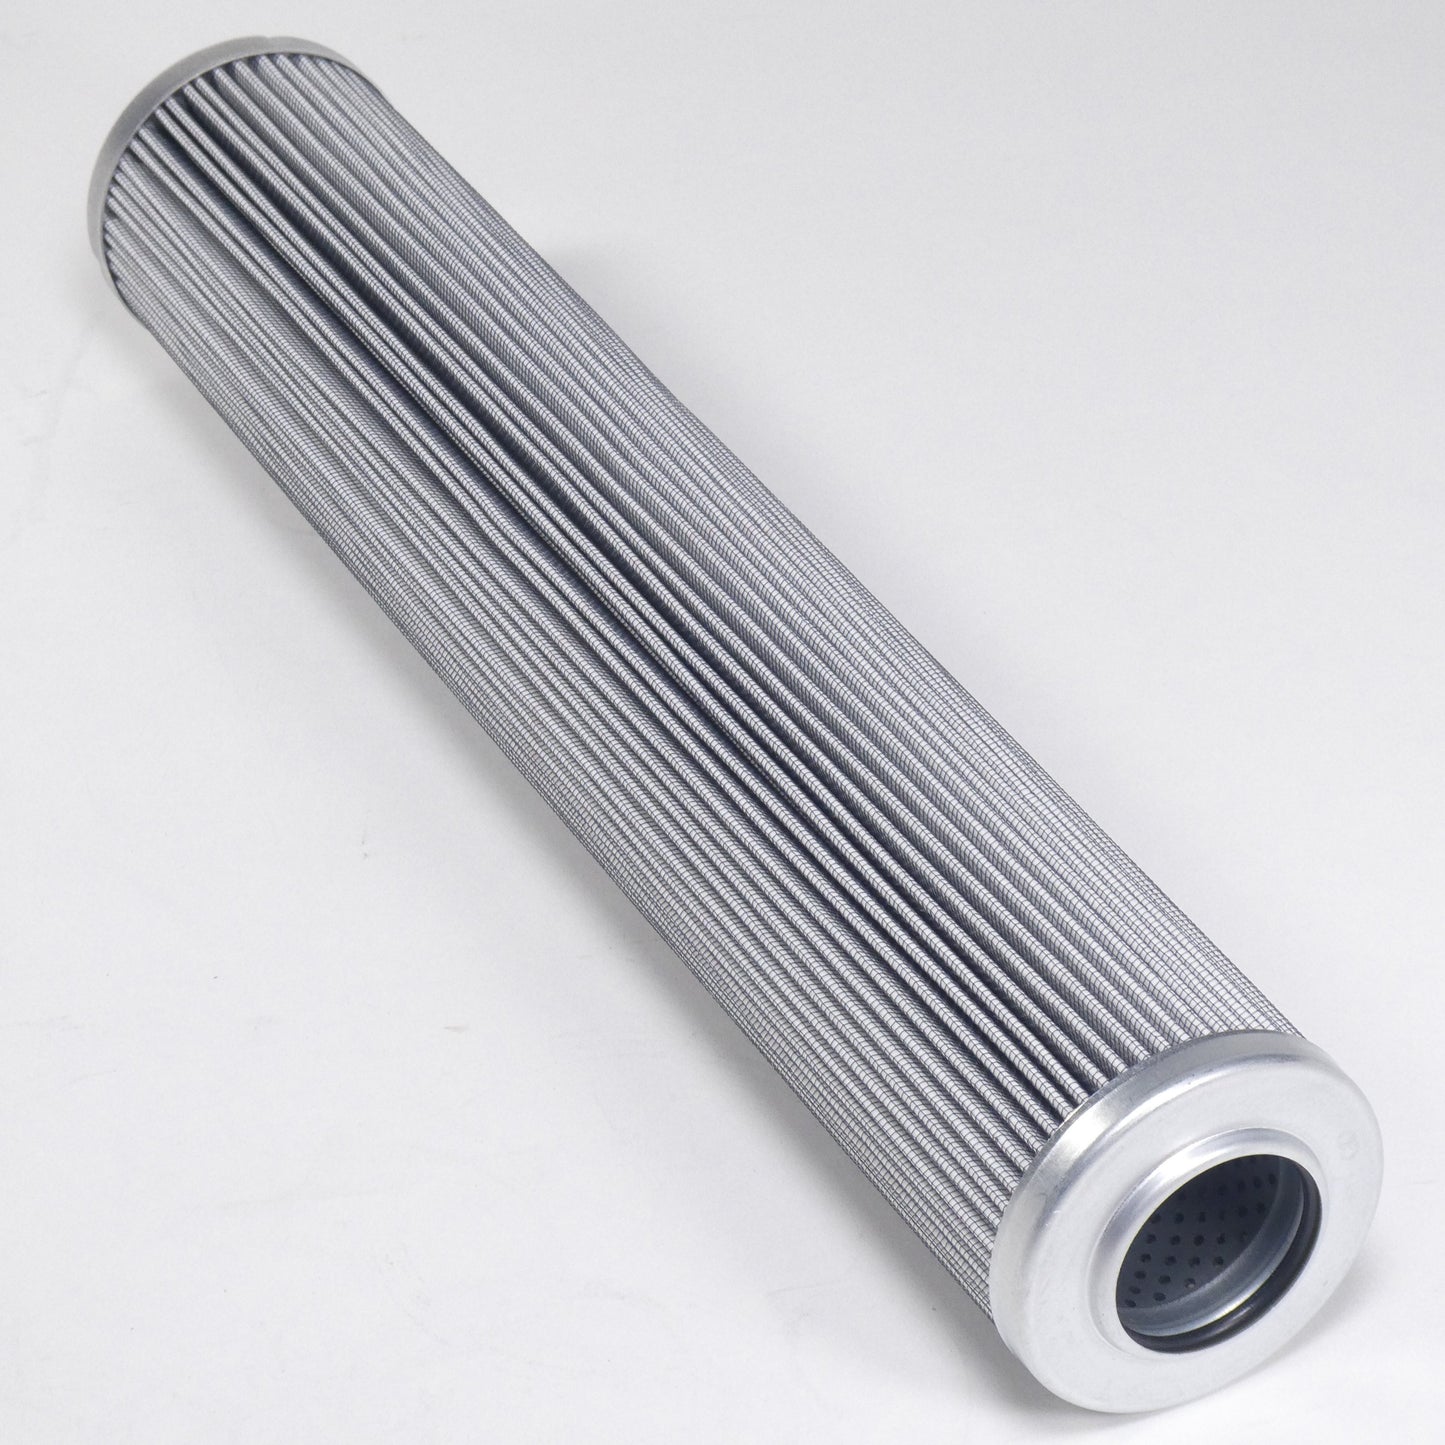 Hydrafil Replacement Filter Element for Filtersoft H9616MDVL